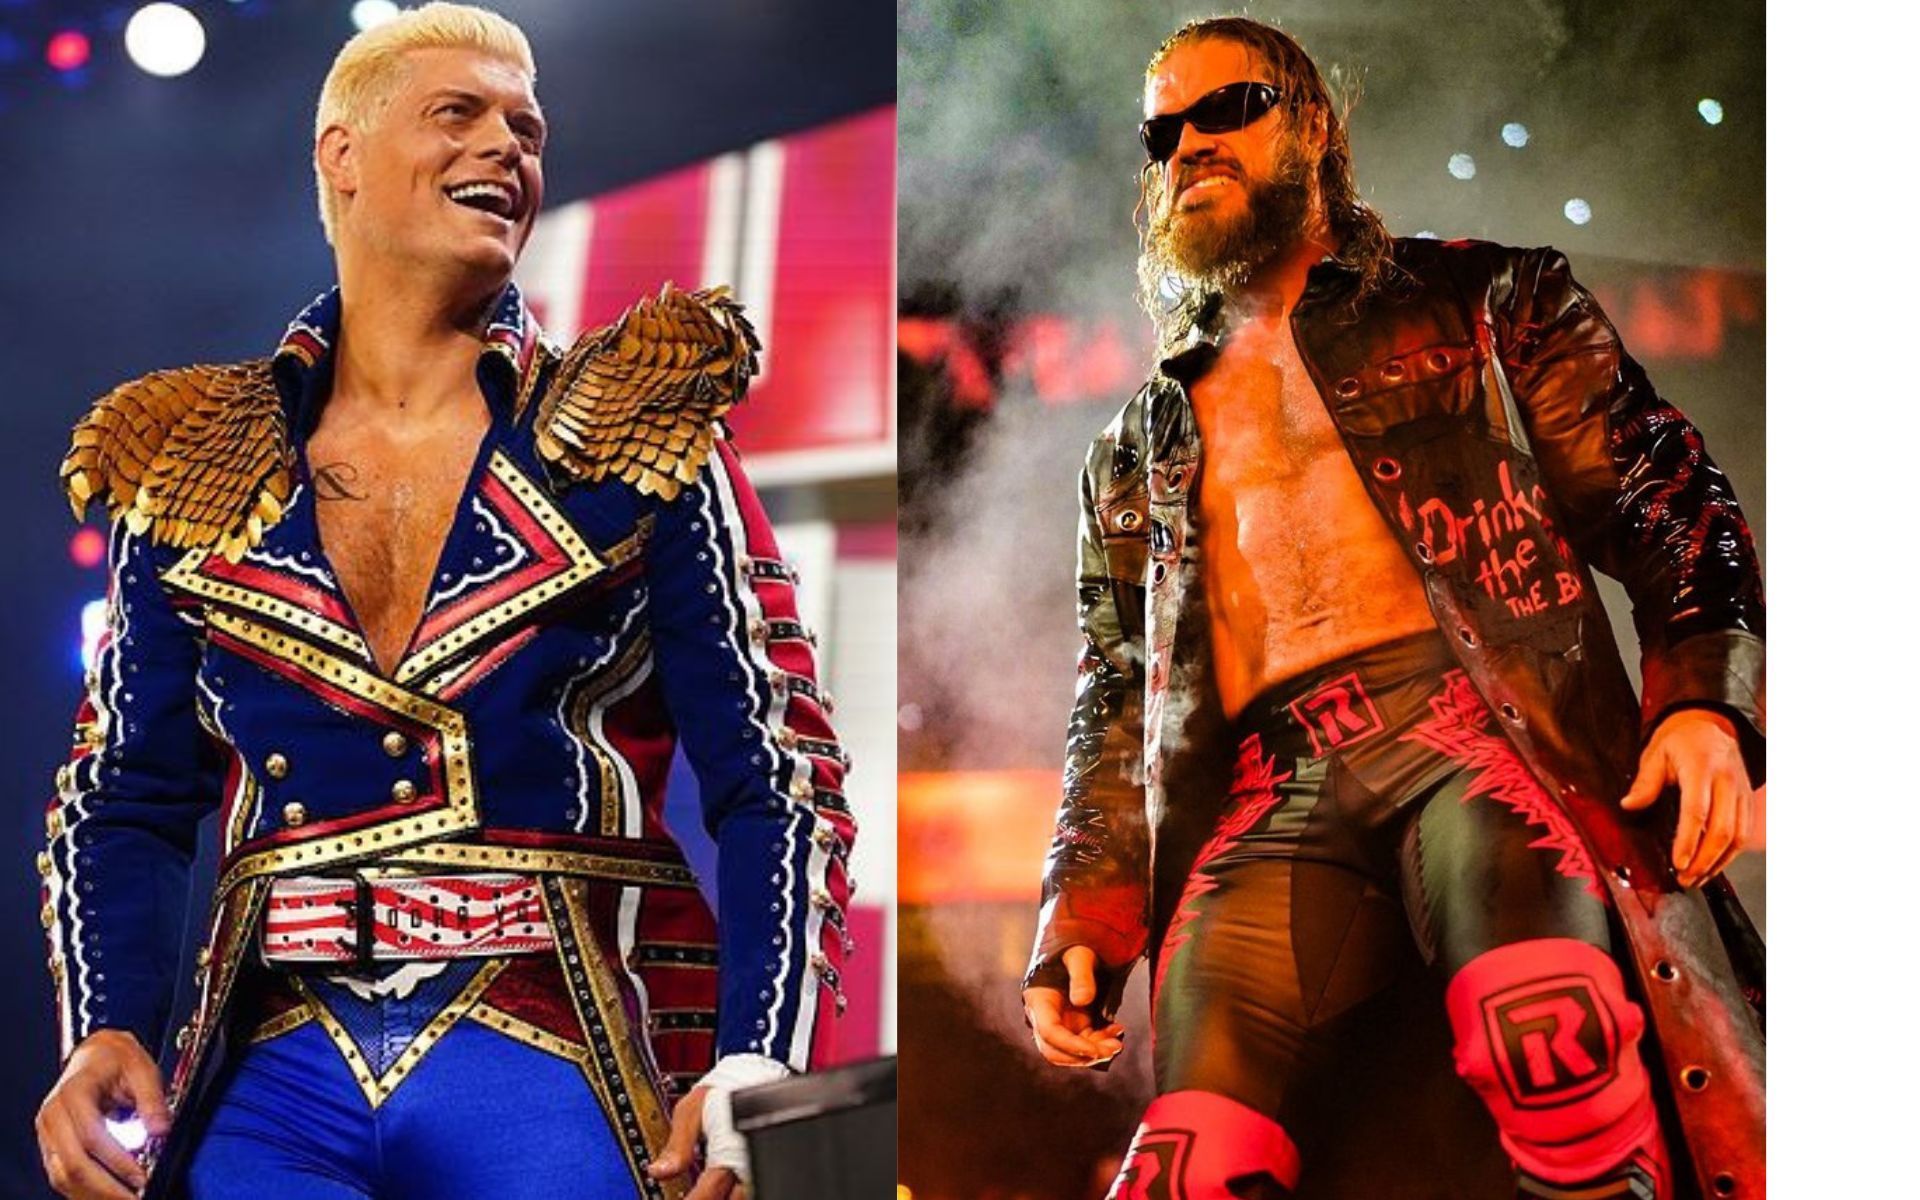 Were we about to see Cody Rhodes vs Edge?